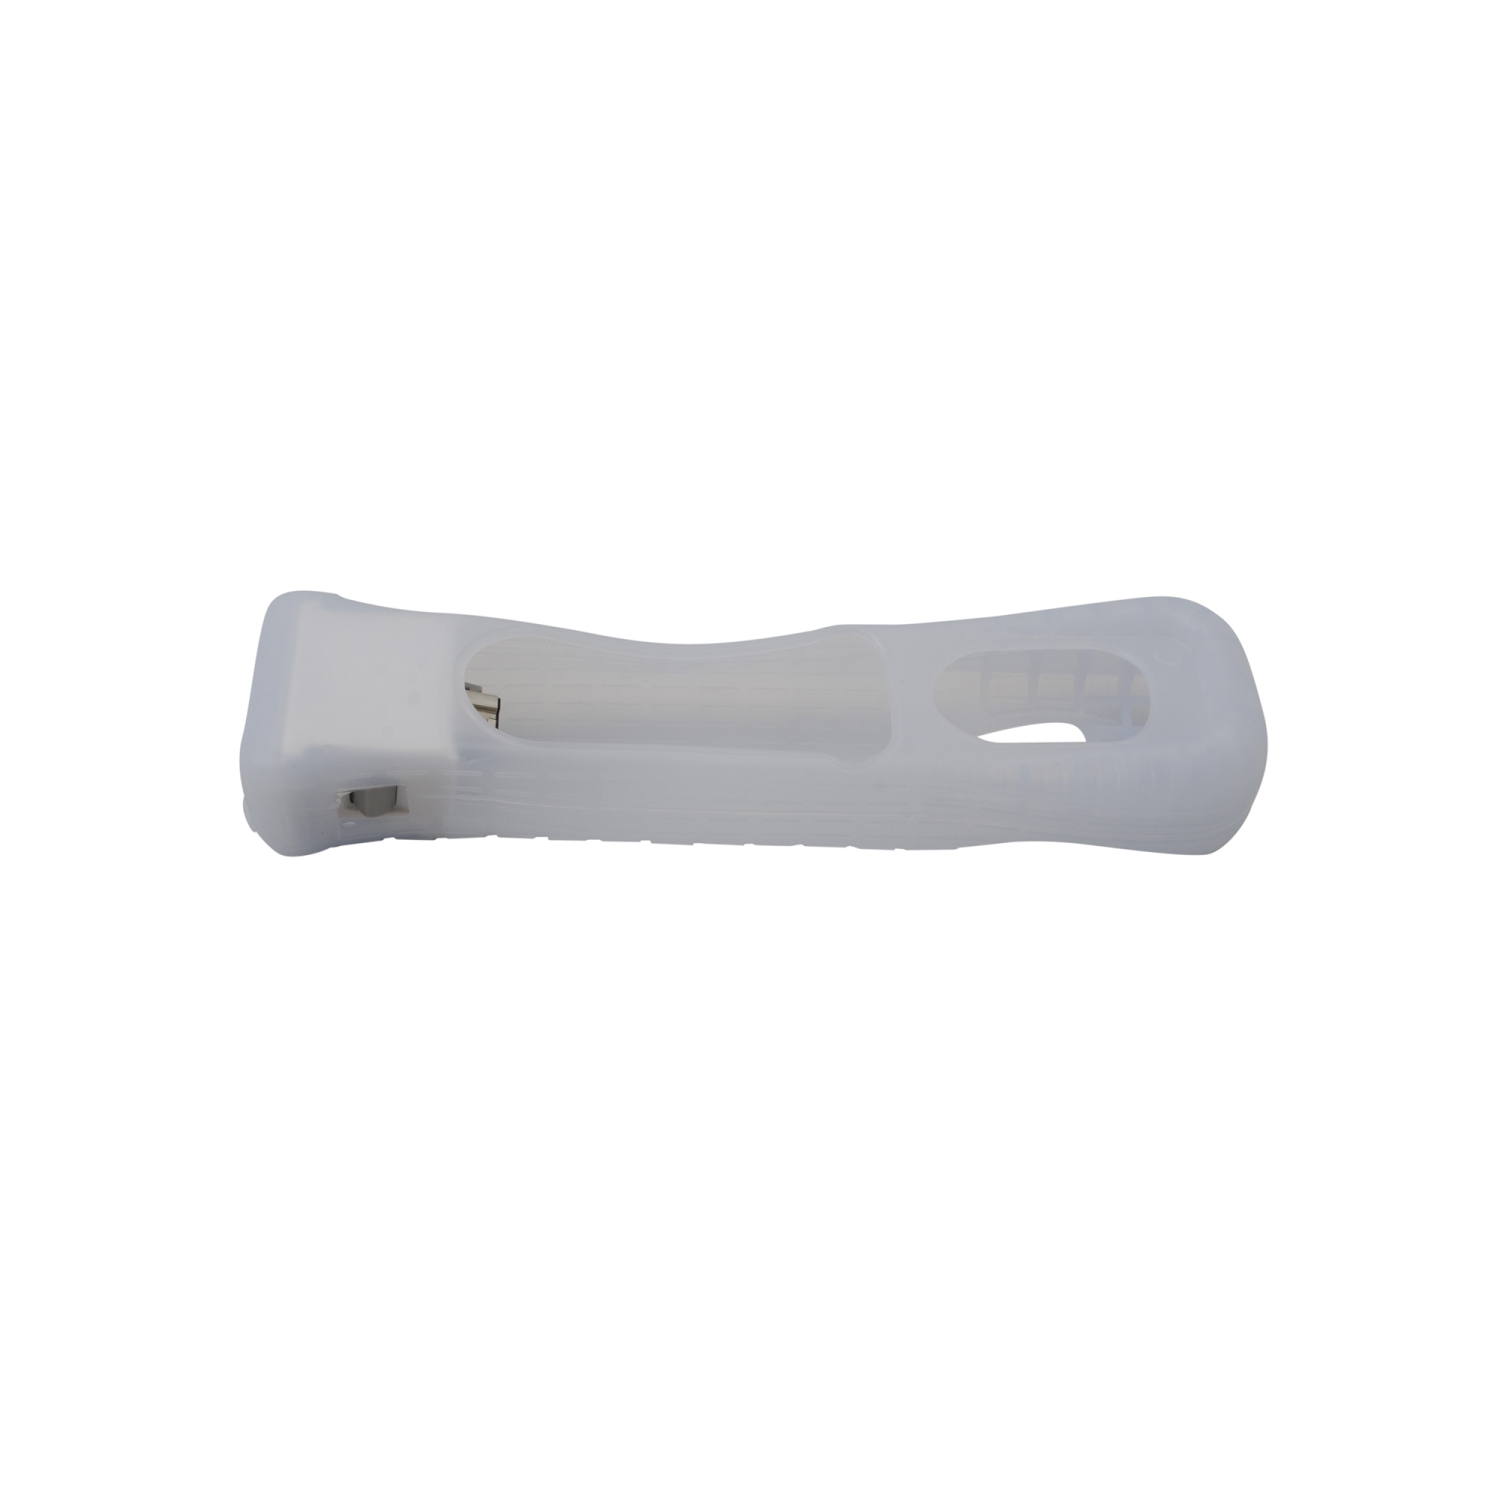 Motion Plus Attachment For Nintendo Wii Controller - White